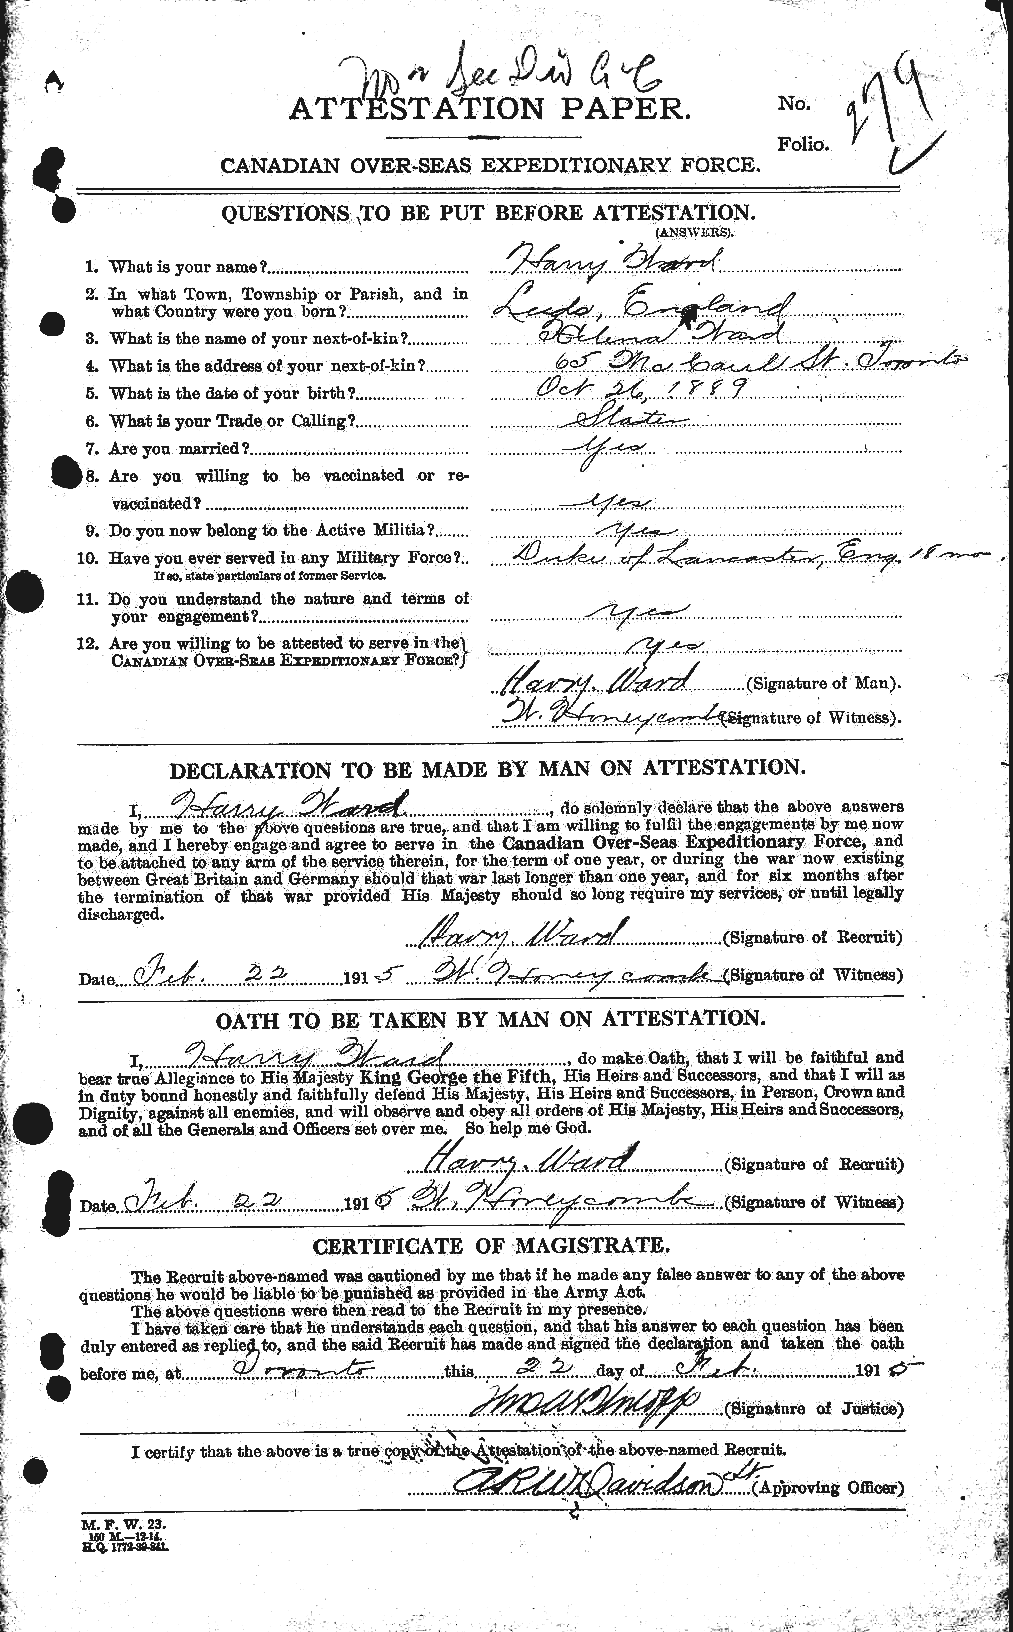 Personnel Records of the First World War - CEF 657809a